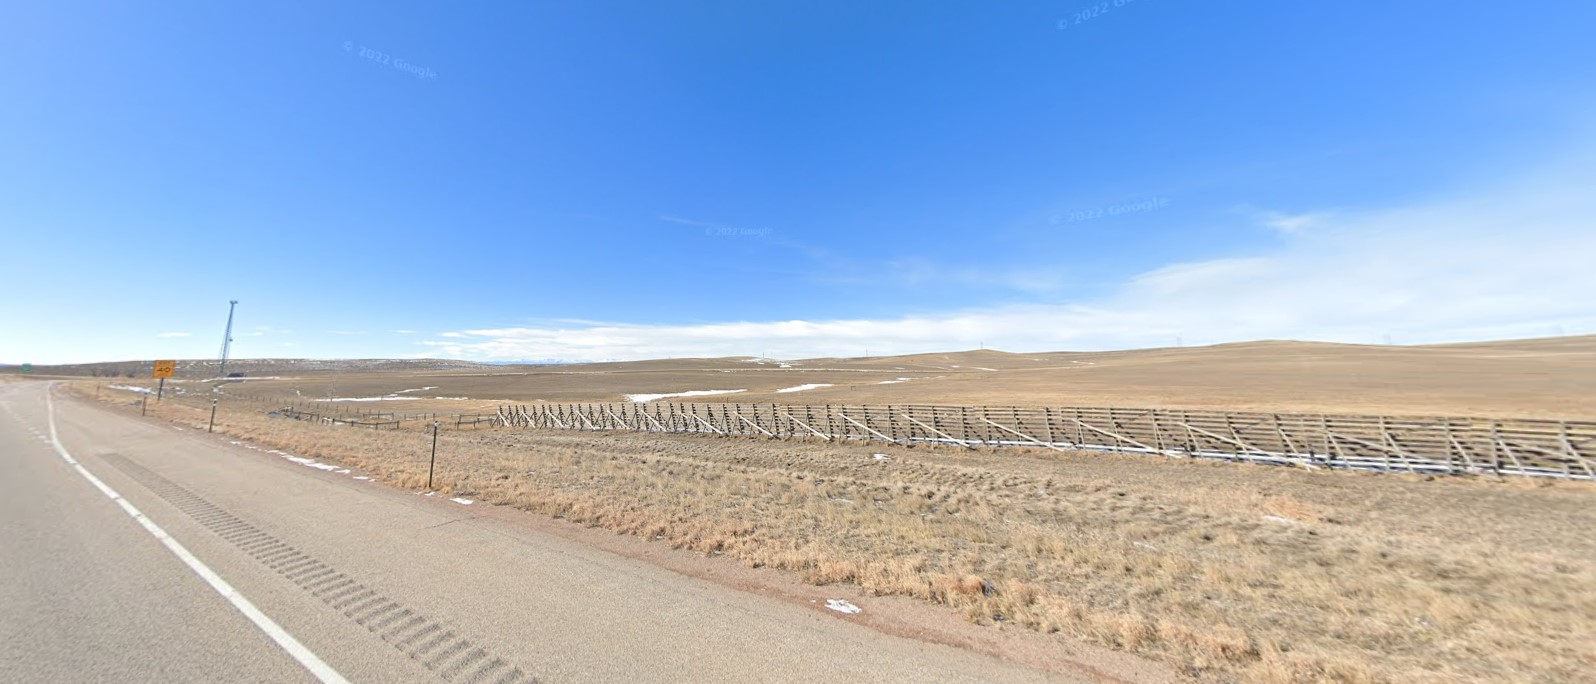 Gillette, Wyoming